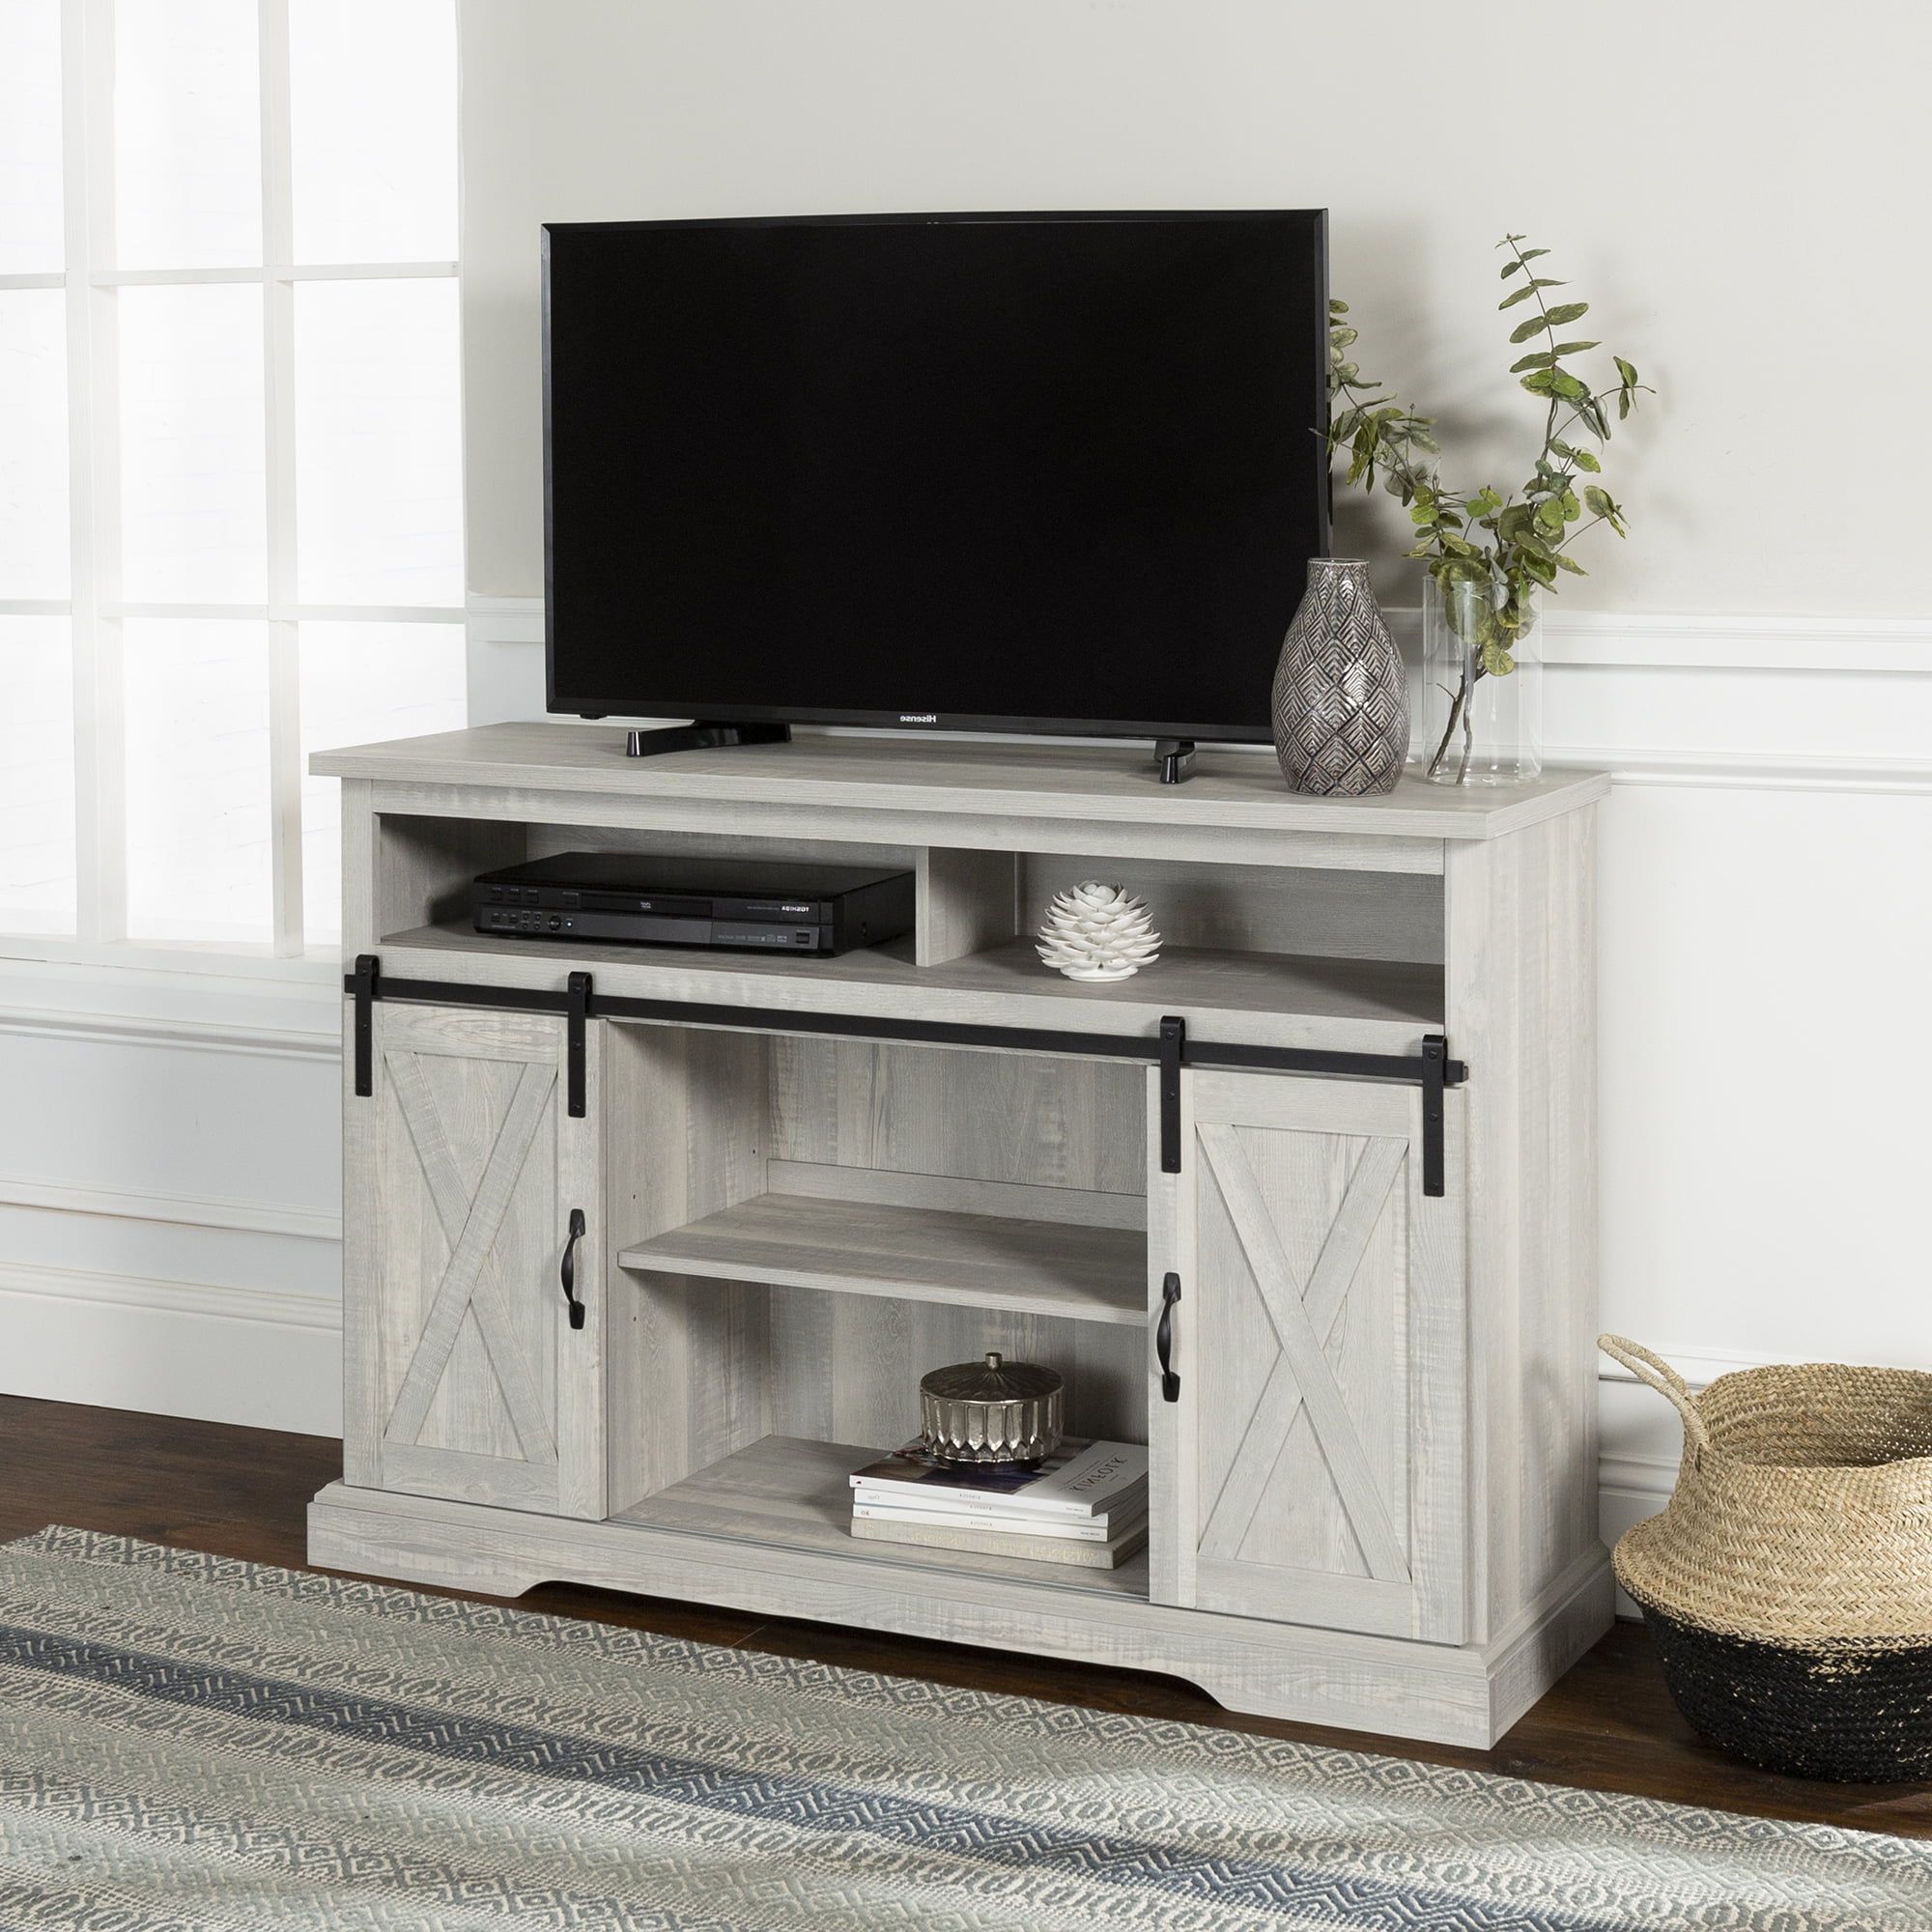 Best And Newest Farmhouse Stands For Tvs Within Manor Park Farmhouse Barn Door Tv Stand For Tvs Up To 58", Stone Grey (View 7 of 15)